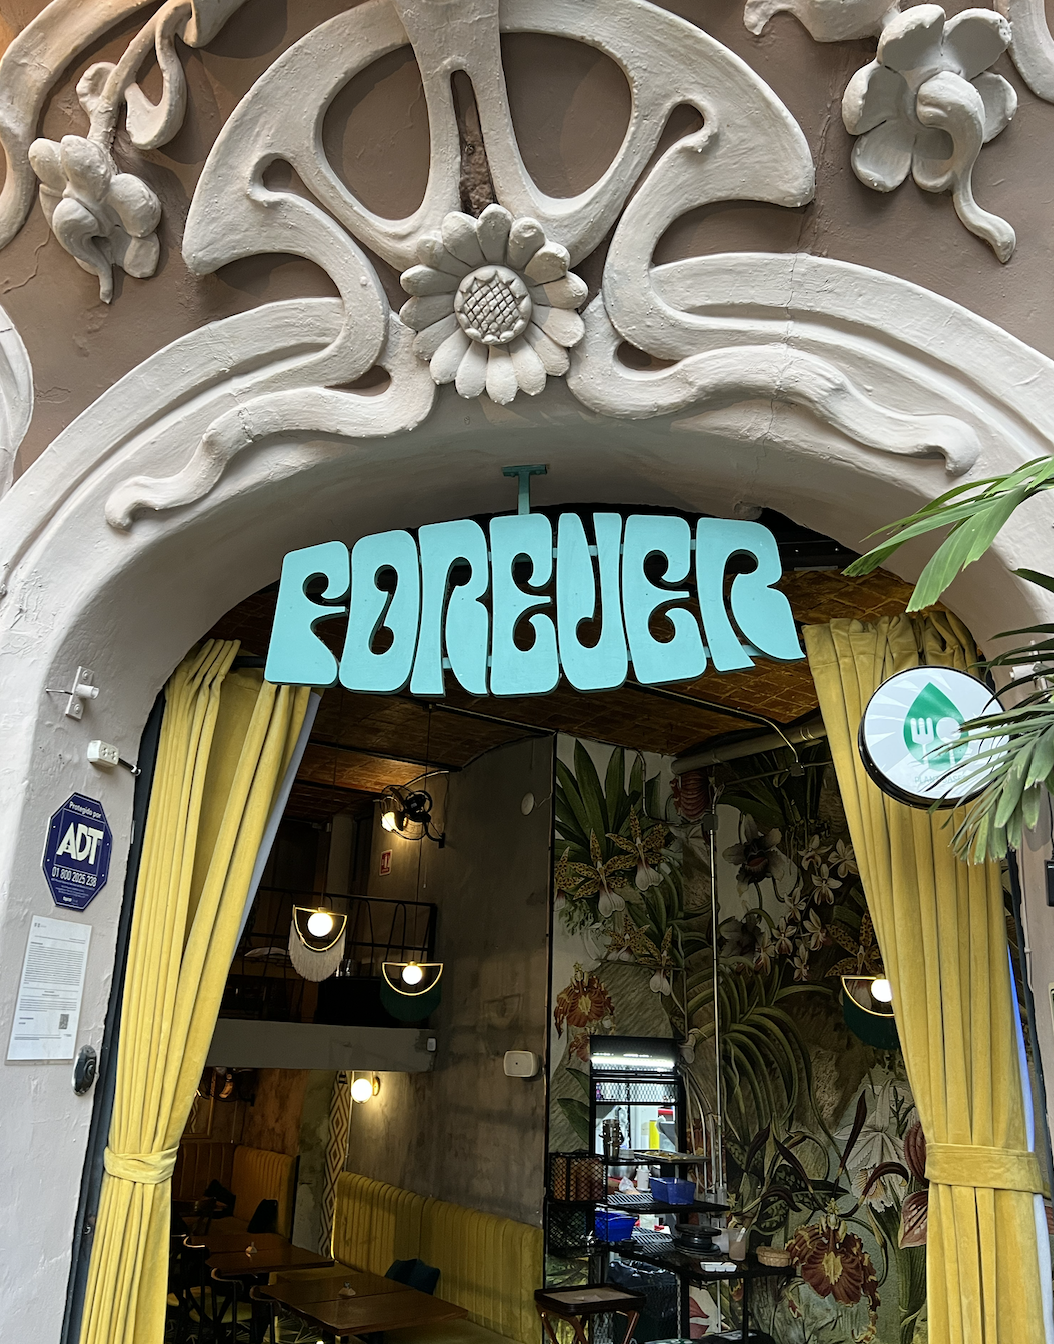 The entrance of a vegan restaurant in Roma Mexico City called Forever